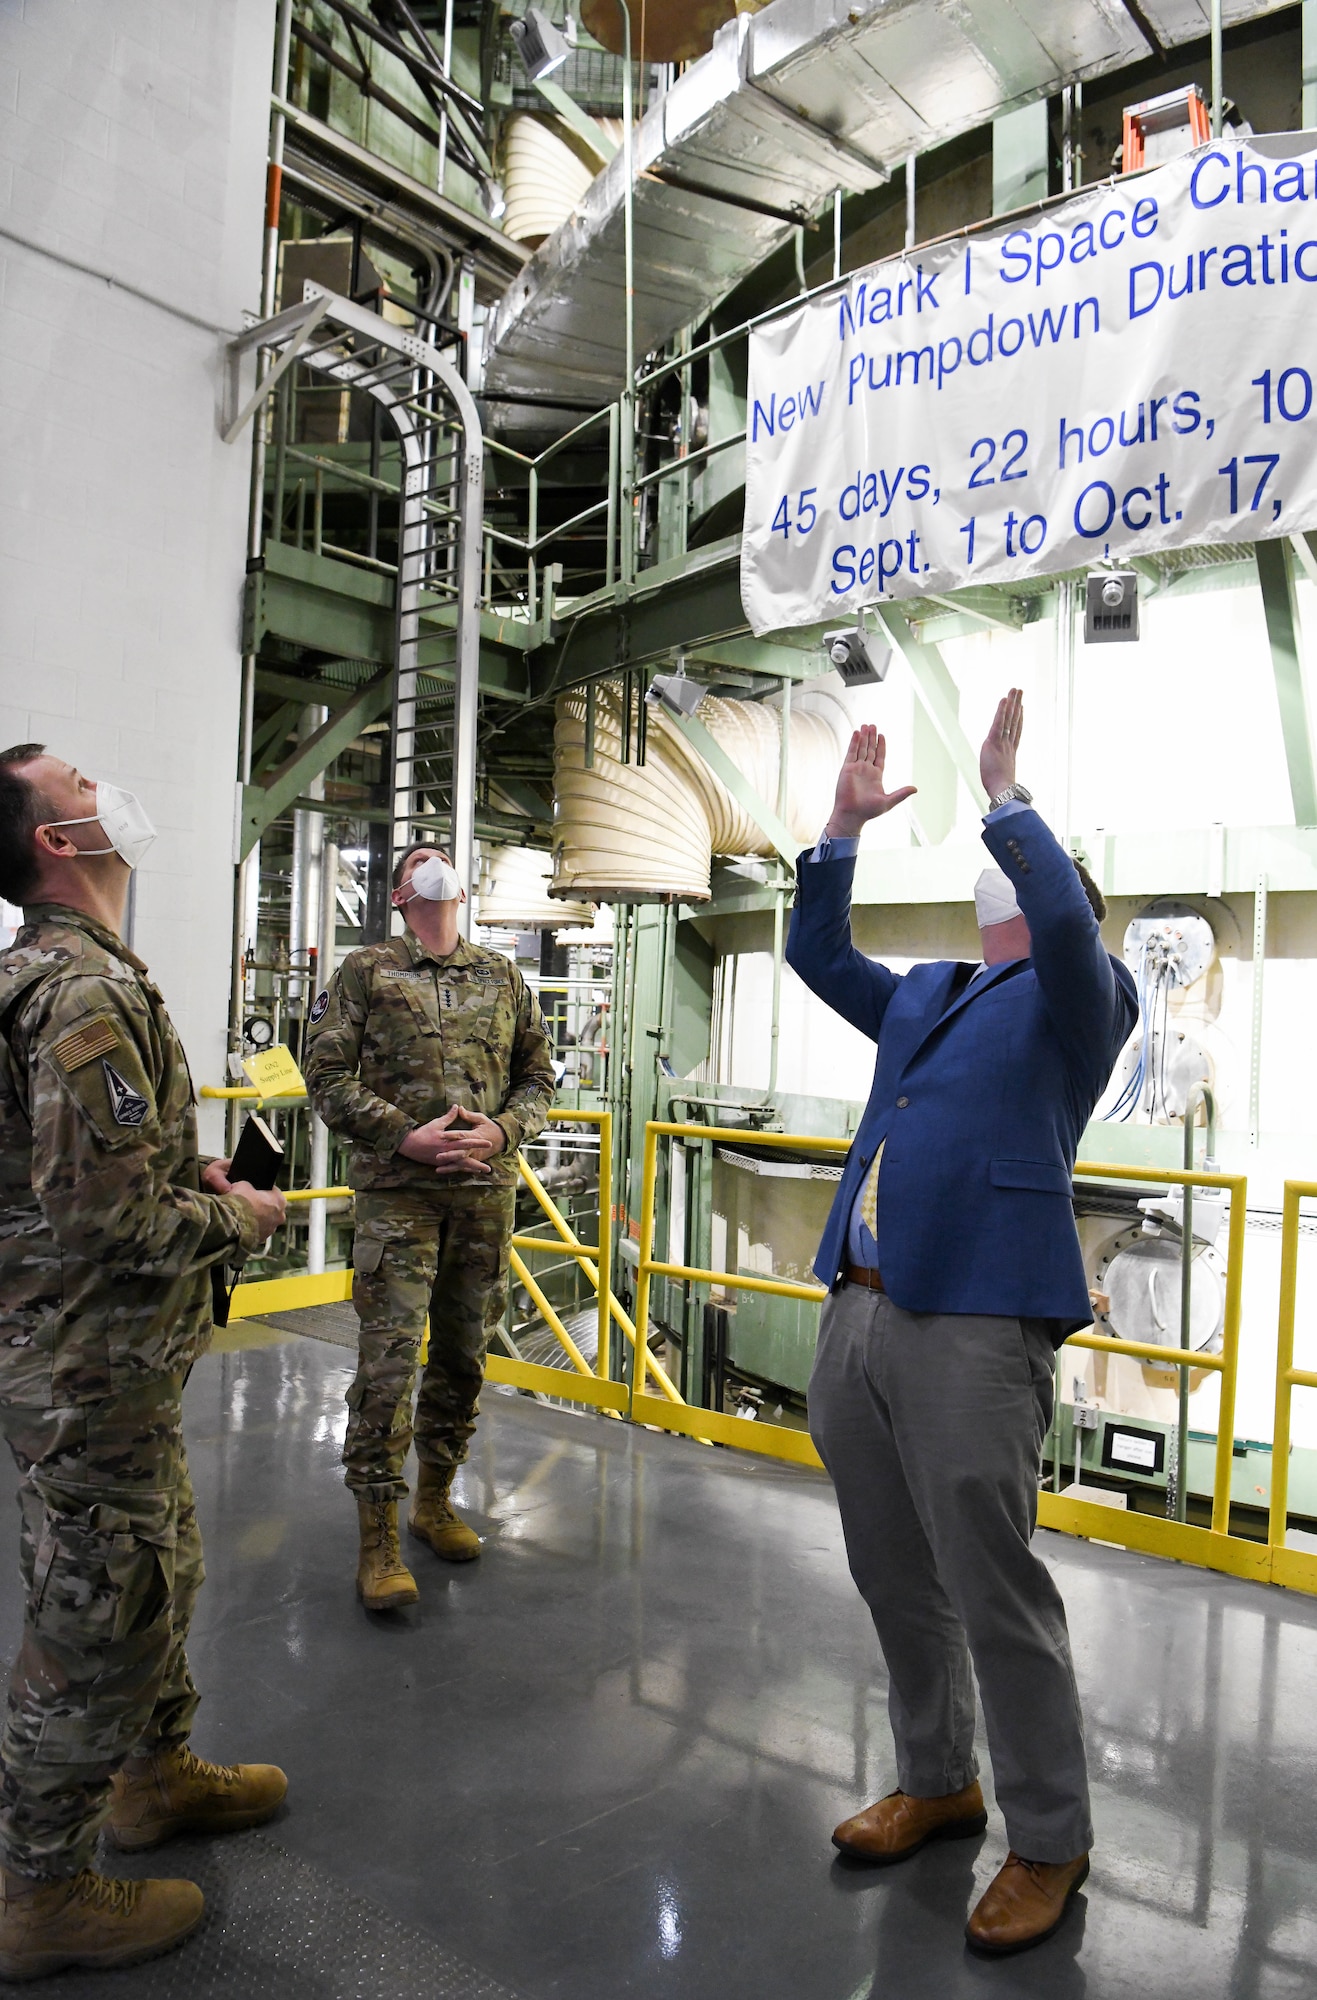 John Claybrook, right, capability manager for the Arnold Engineering Development Complex Space Asset Resilience Ground Test and Evaluation, explains how operations are conducted at the Mark 1 Aerospace Chamber to Gen. David Thompson, center, vice chief of space operations, U.S. Space Force, during a tour of a capabilities pertinent to the Space Force available at Arnold Air Force Base, Tenn., headquarters of AEDC, Feb. 5, 2021. Also pictured is Col. Nick Hague, Space Force director of Test and Evaluation. (U.S. Air Force photo by Jill Pickett)